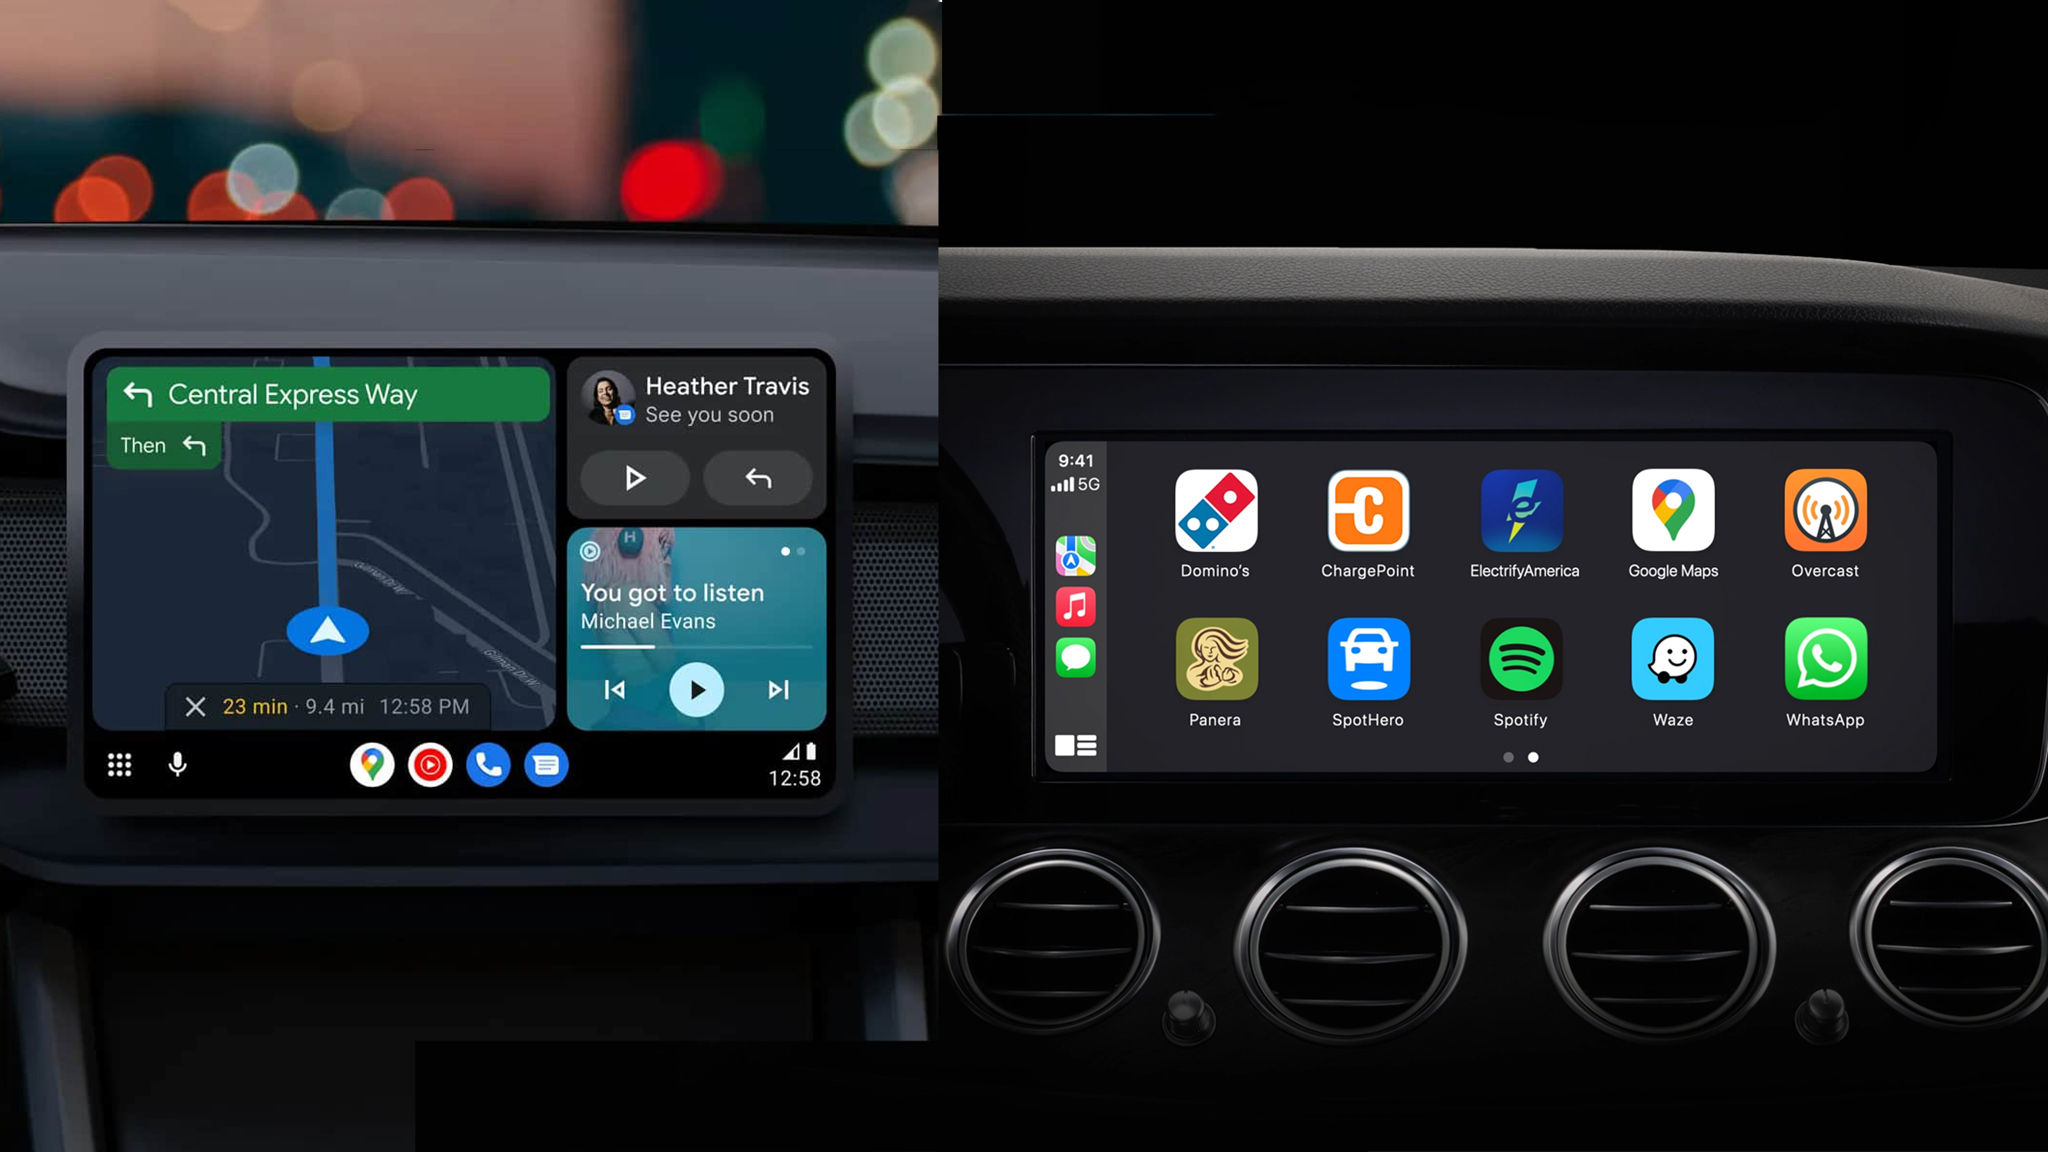 Top 5 reasons to look for Apple CarPlay and Android Auto in a new car